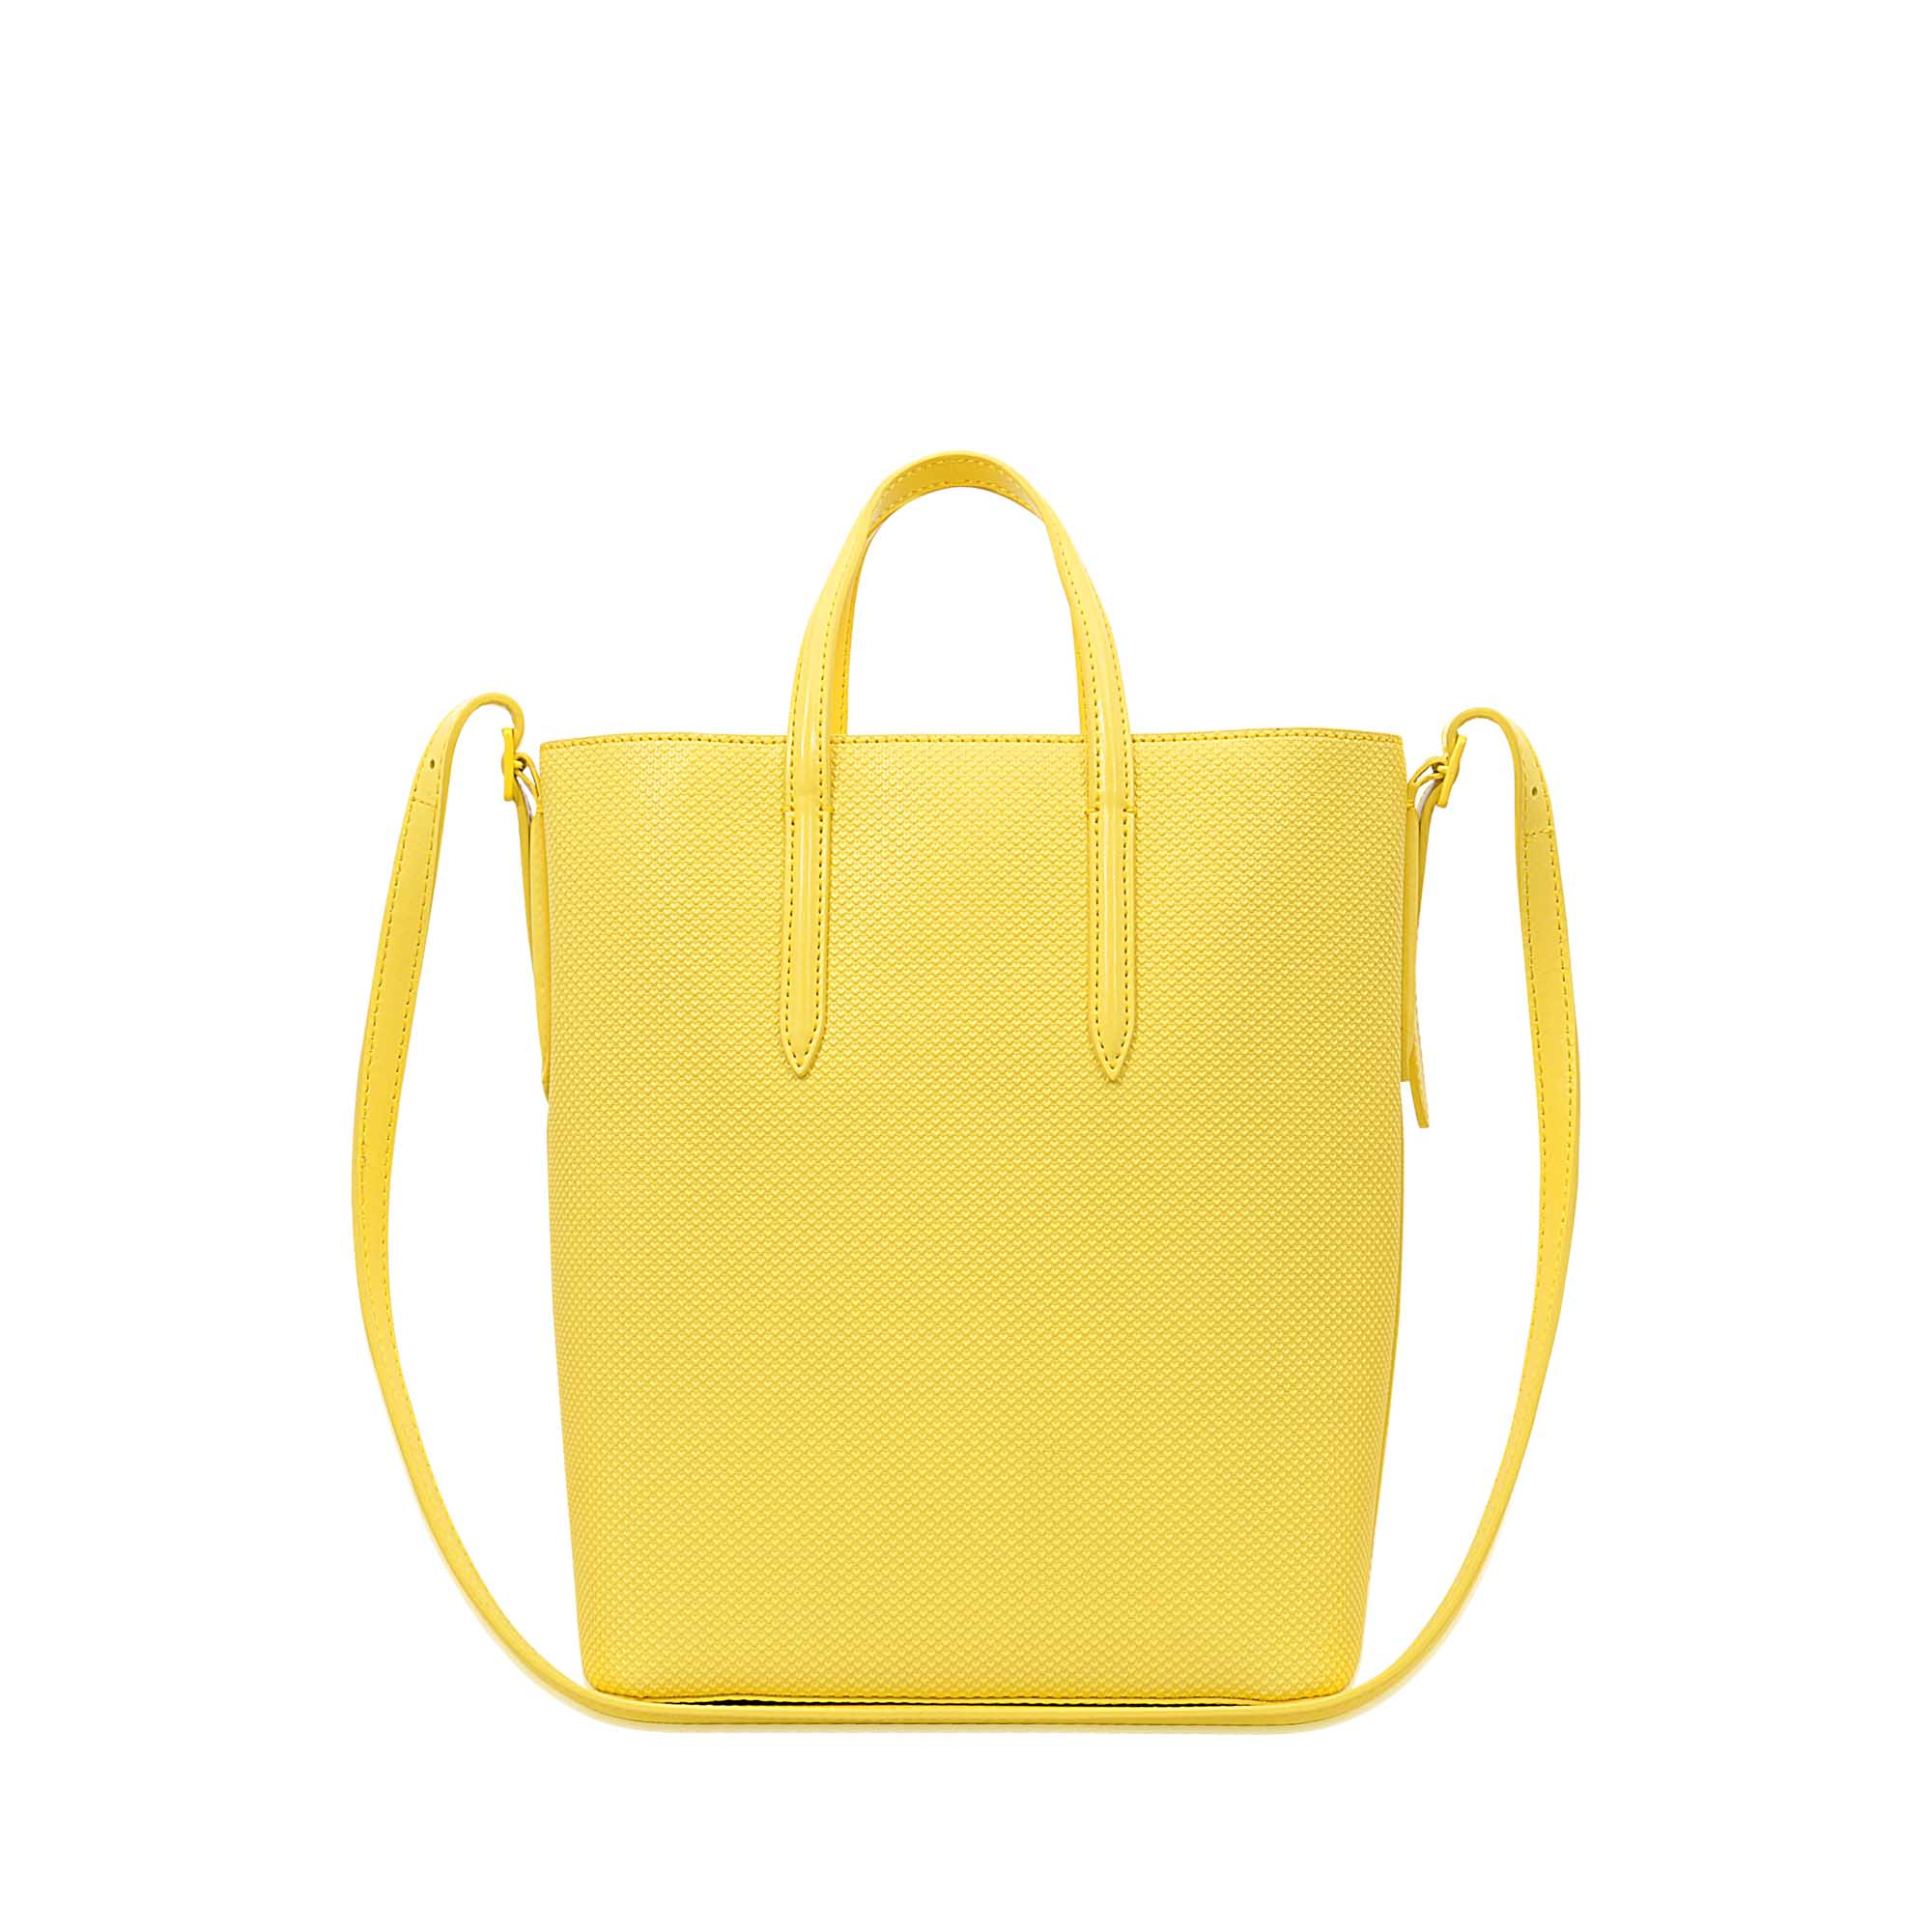 Lacoste Chantaco Greenical Tote Bag in Yellow - Lyst